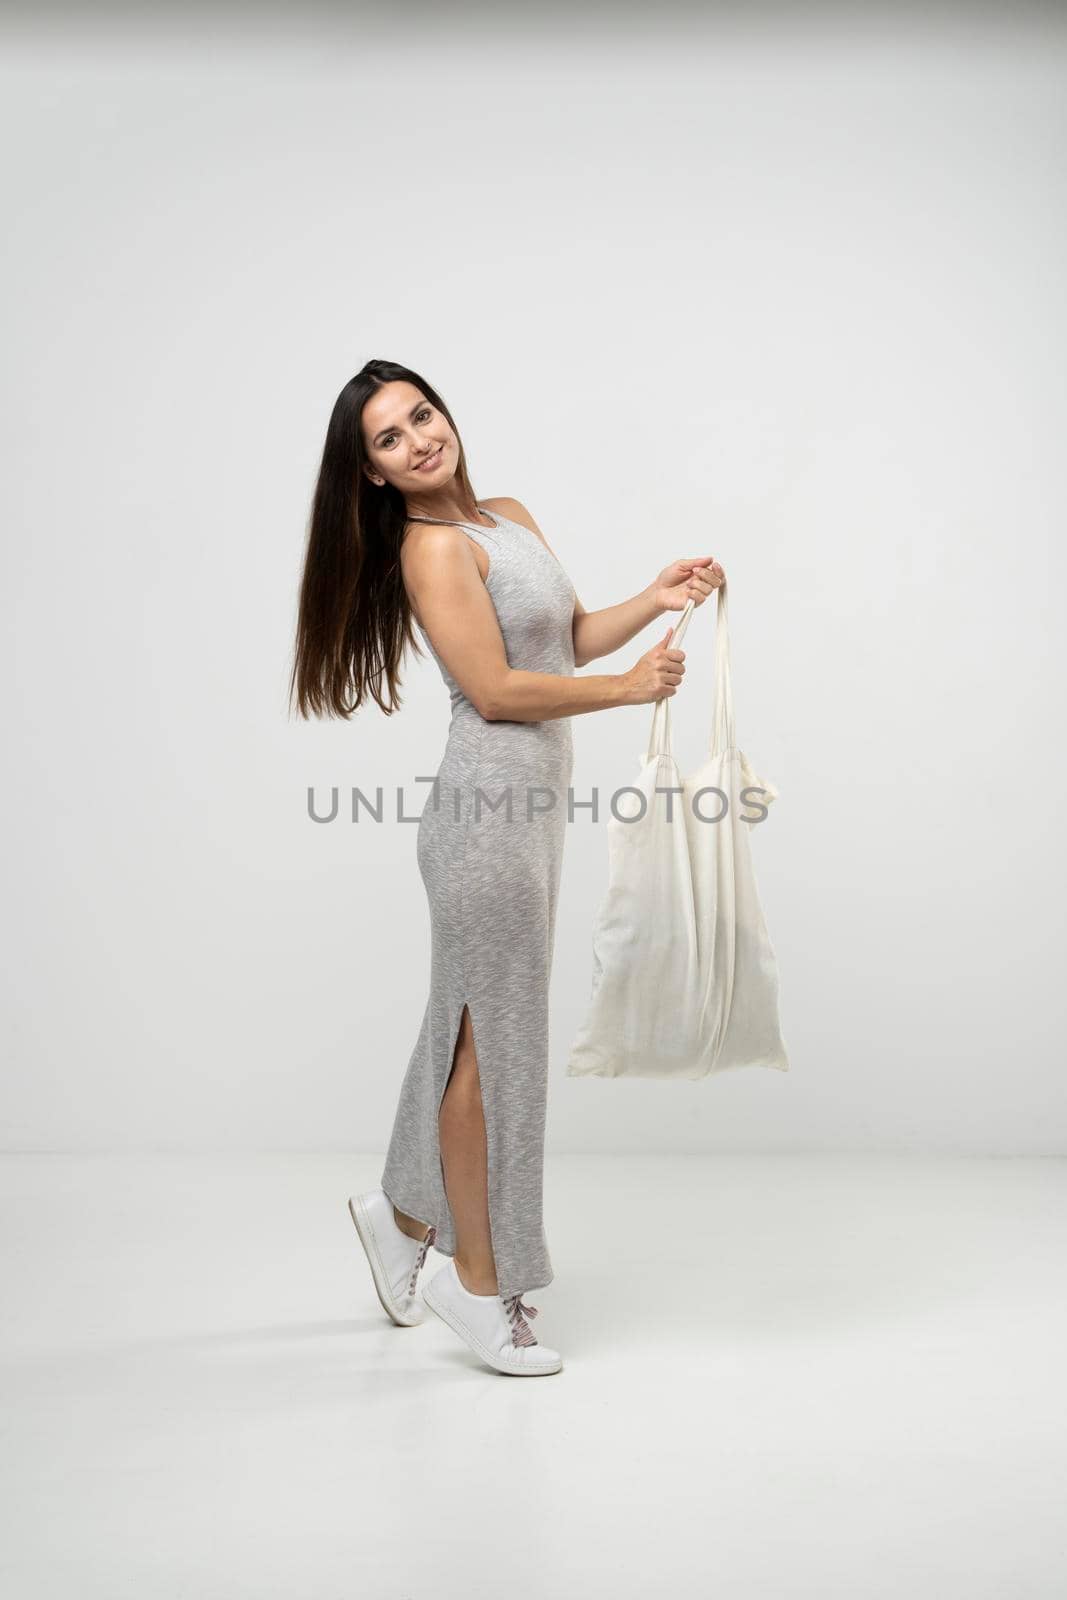 Brunette woman in a grey dress holding cotton shopper bag with groceries over white background. Rejection of plastic. Zero waste concept